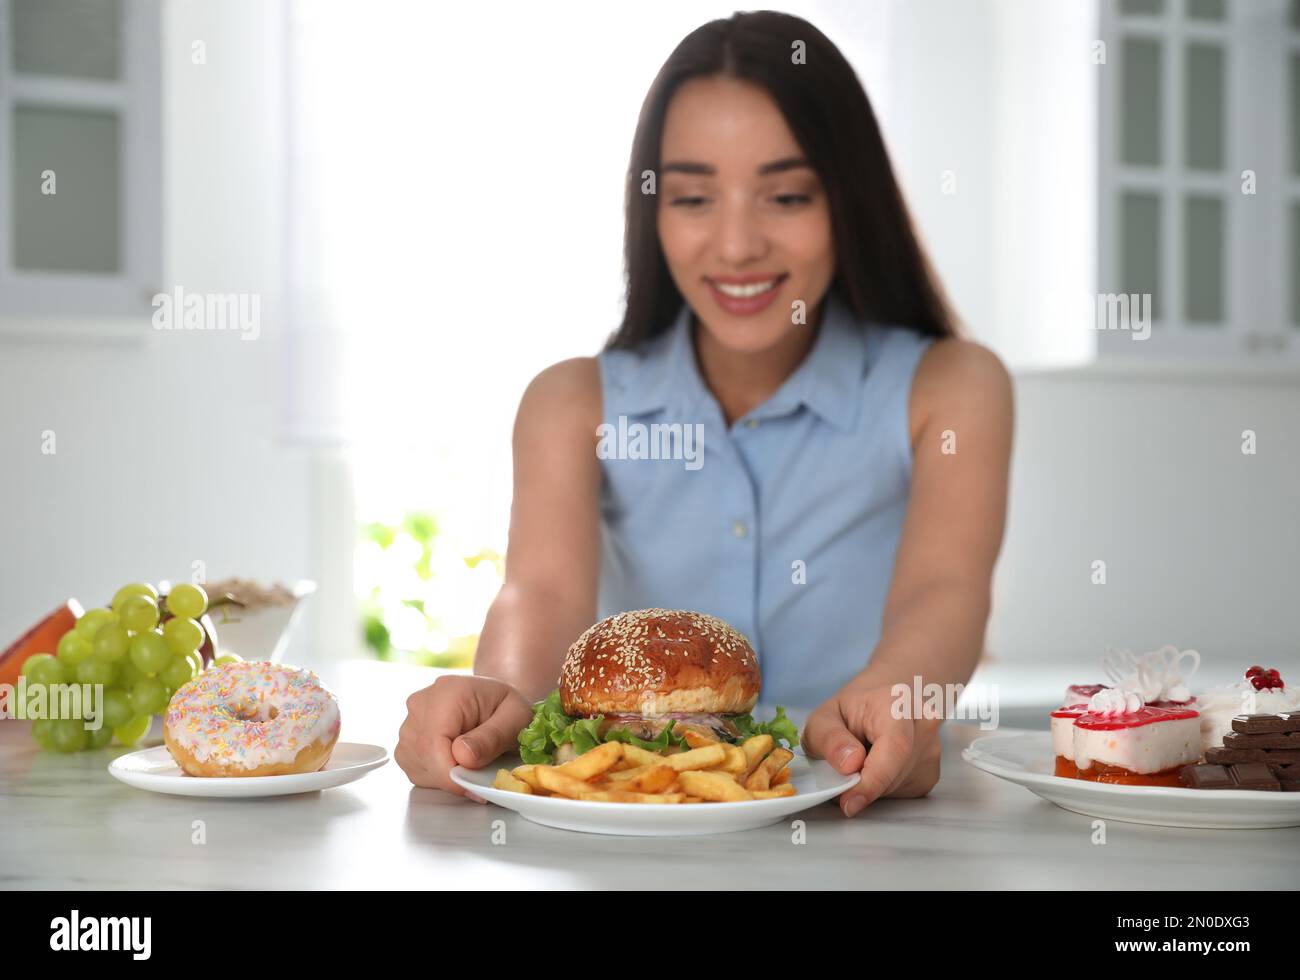 Concept of choice. Woman taking plate with tasty burger and French fries in kitchen, focus on food Stock Photo